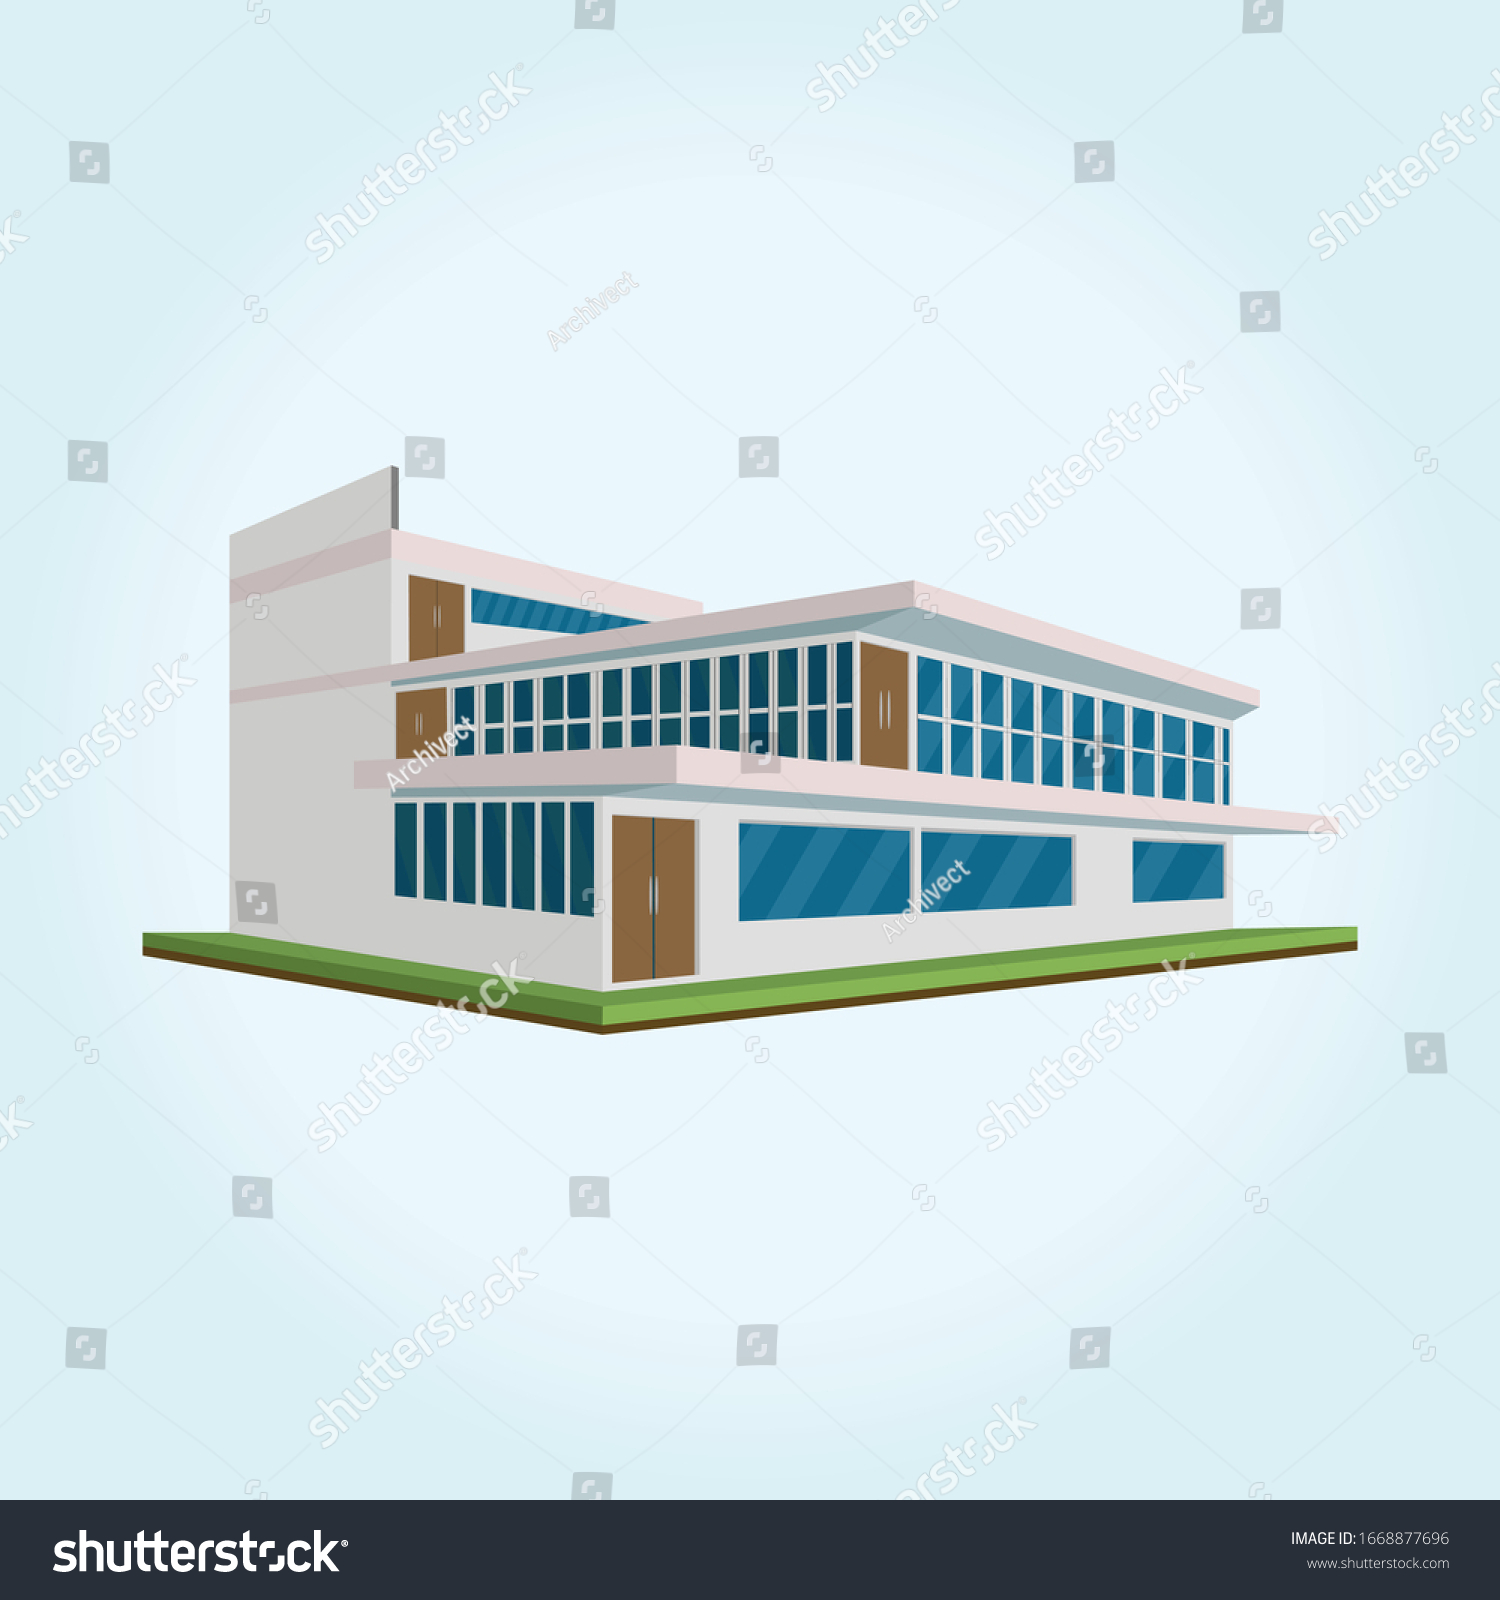 Houses Modern Building Architecture Ground Vector Stock Vector (Royalty ...